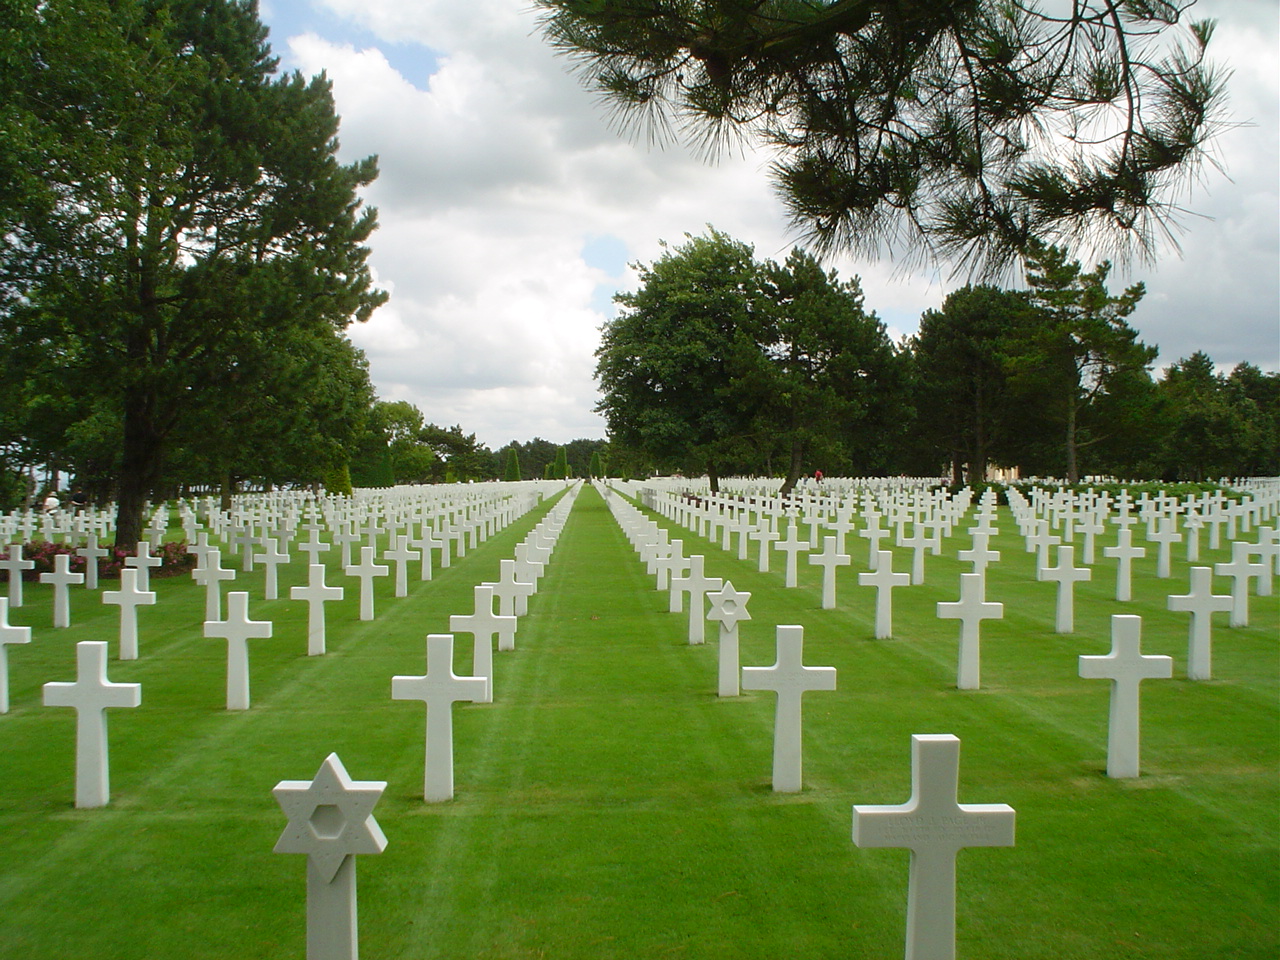 American Military Cemetery near Colleville-sur-Mer, Normandy, France